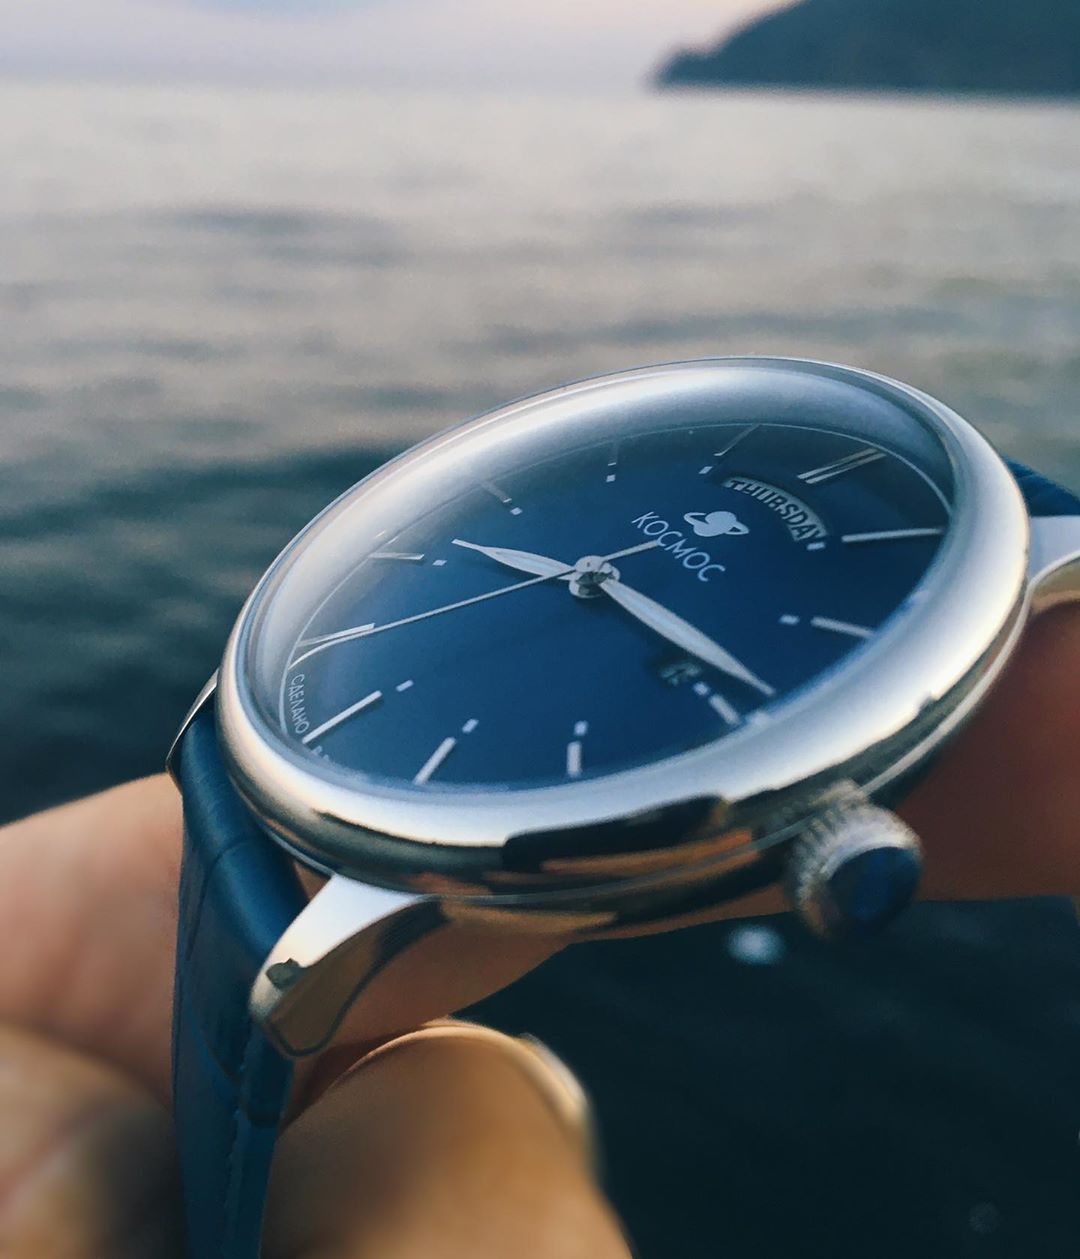 Orion series watches are a good reminder of the beauty and amazingness of the Cosmos. 